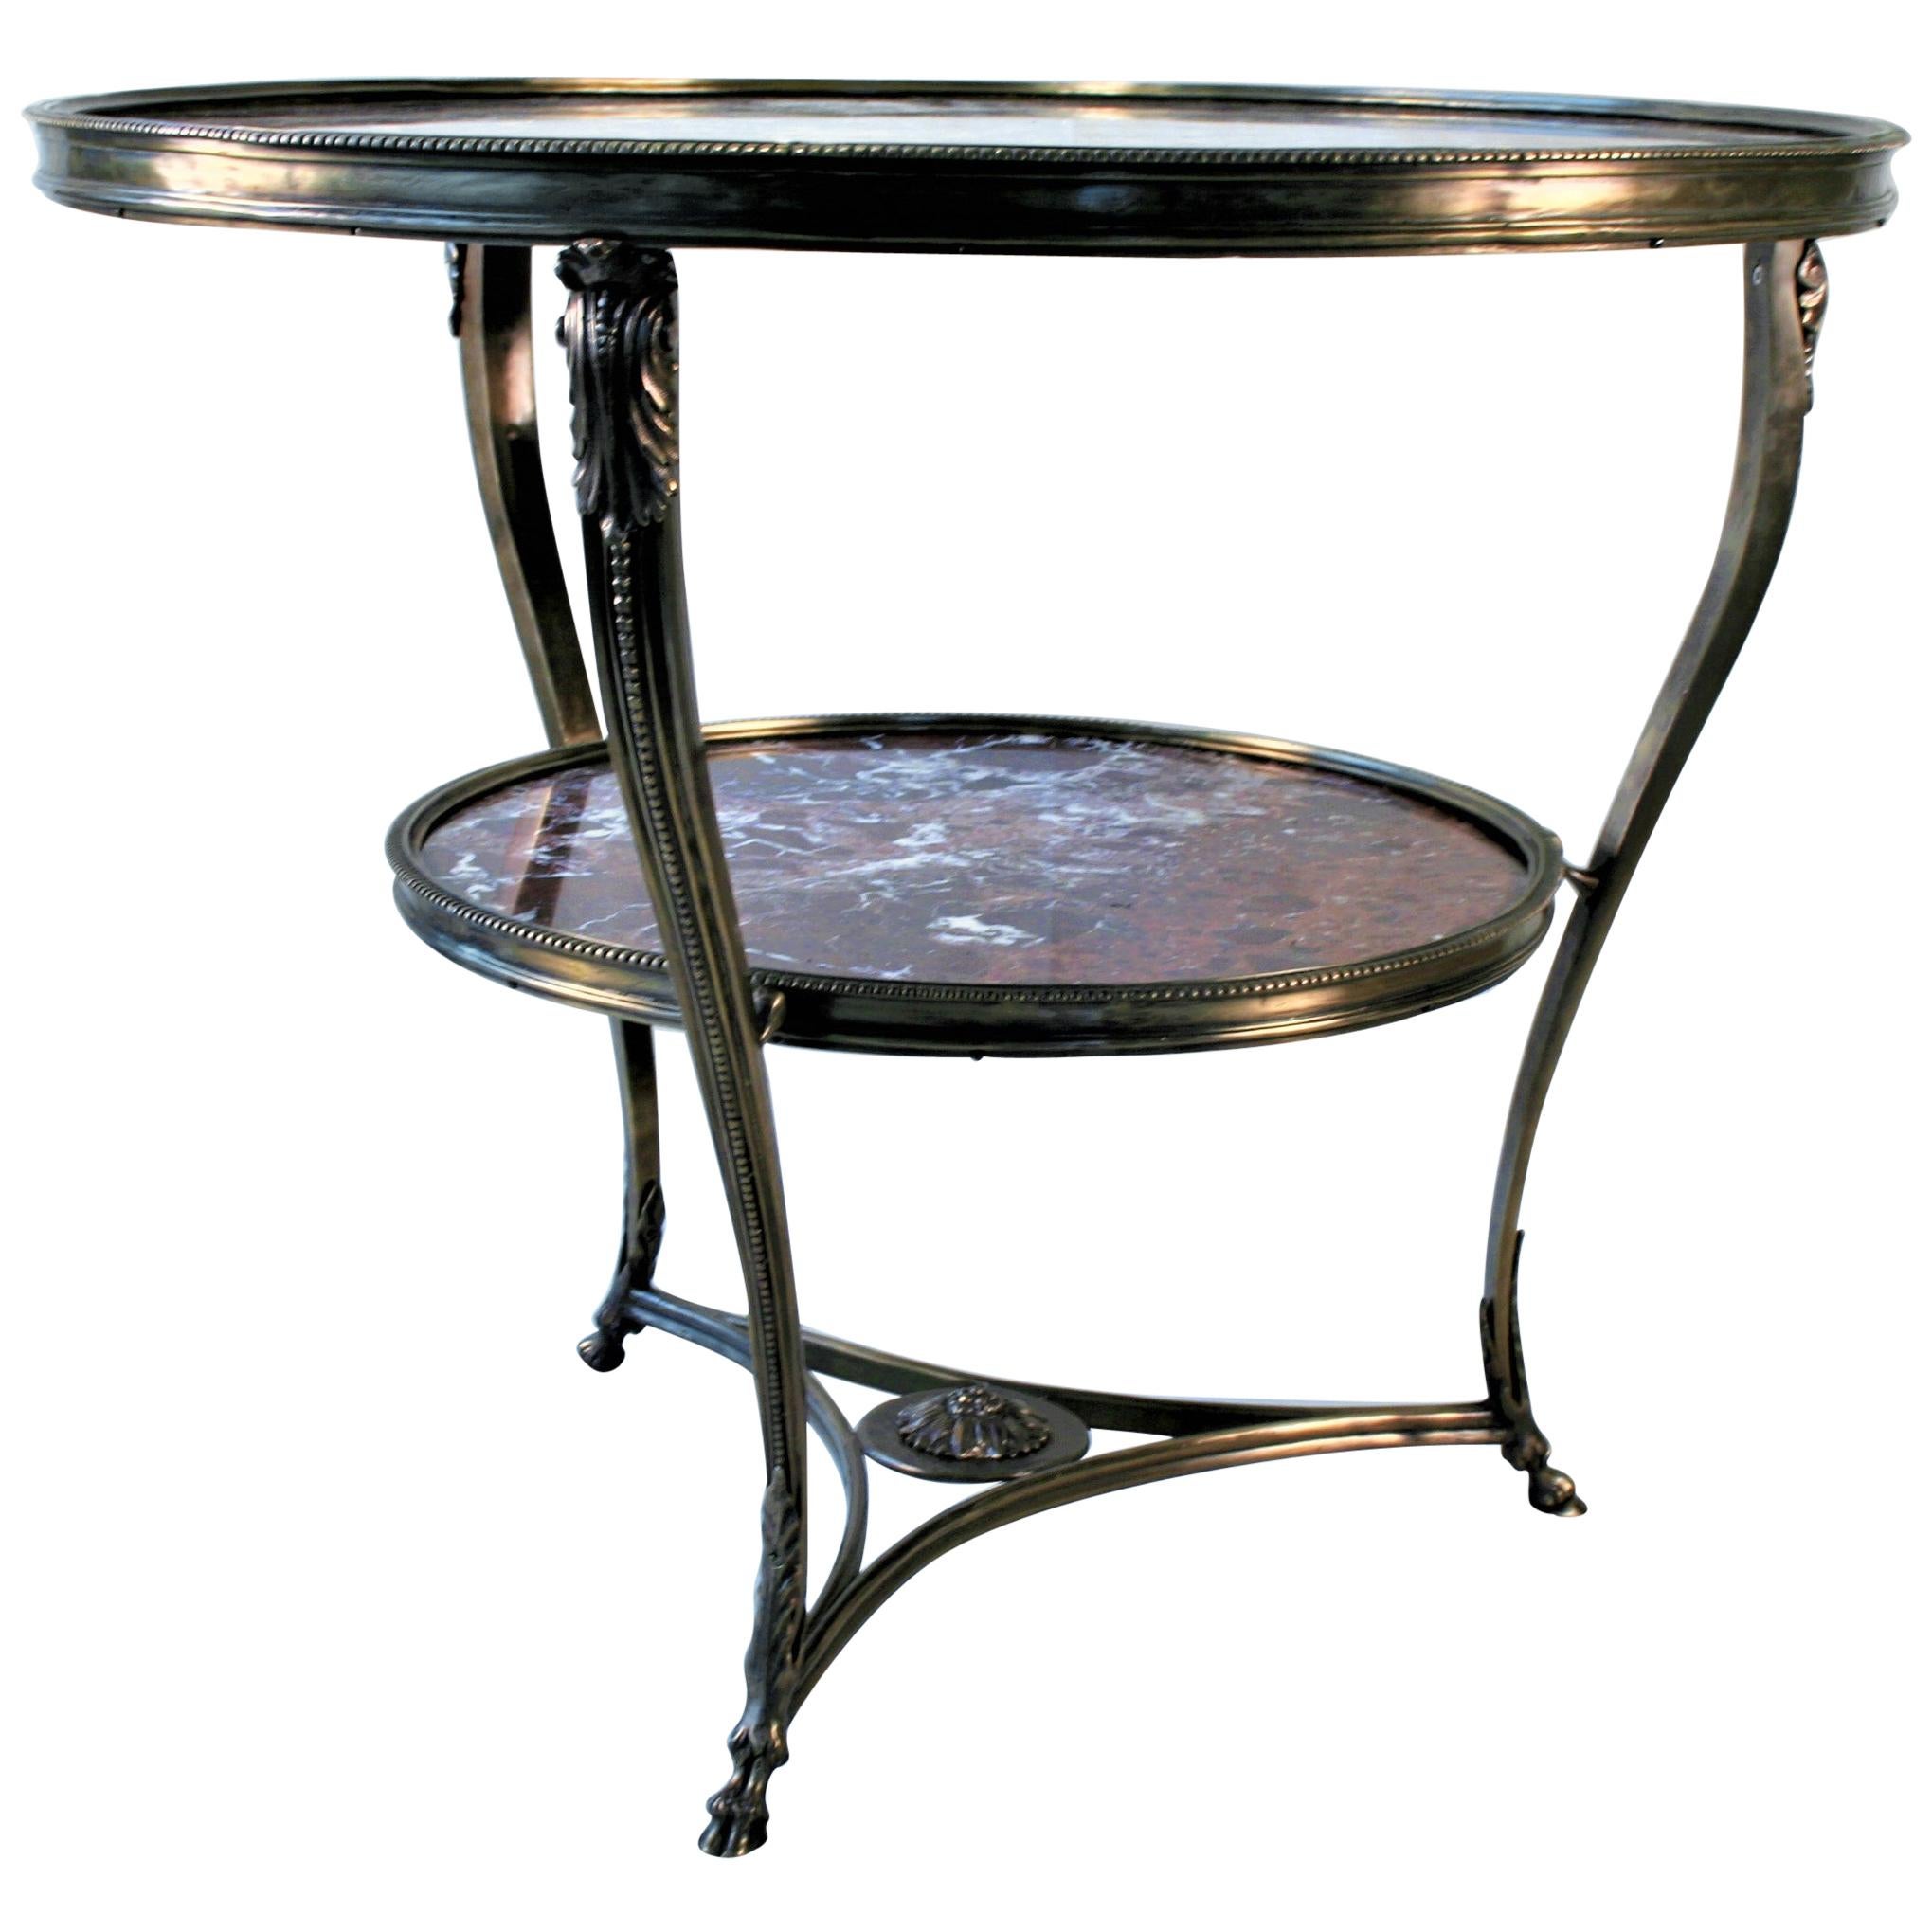 Gueridon Marble Table, Red Italian Marble, Bronze Casting Style of